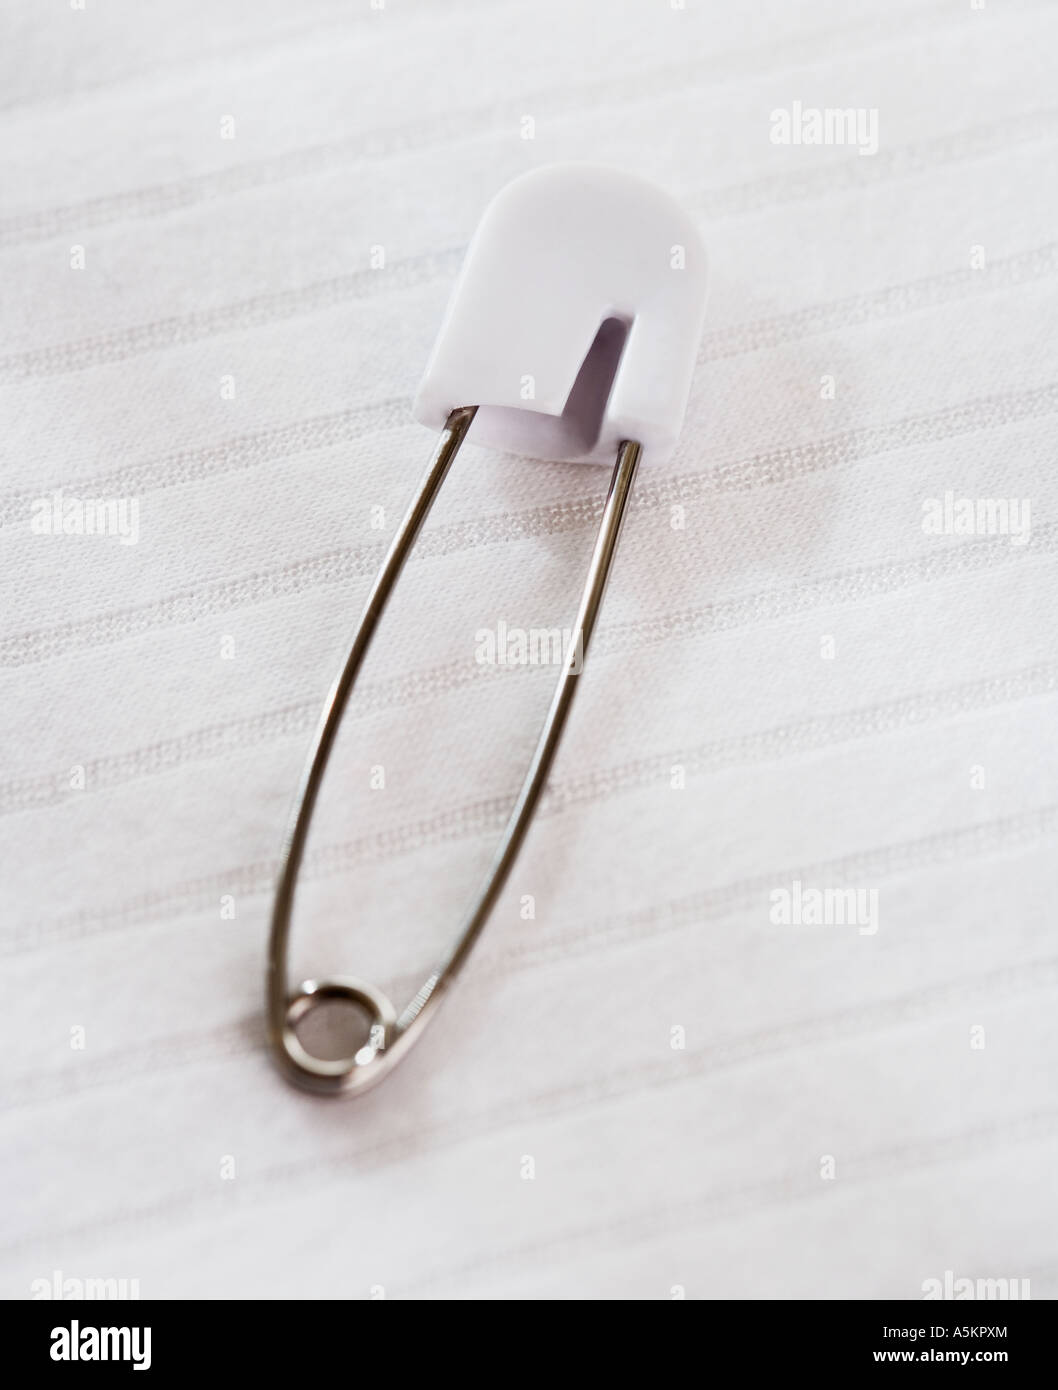 Bulb Gourd Small Thin Iron Safety Pins 